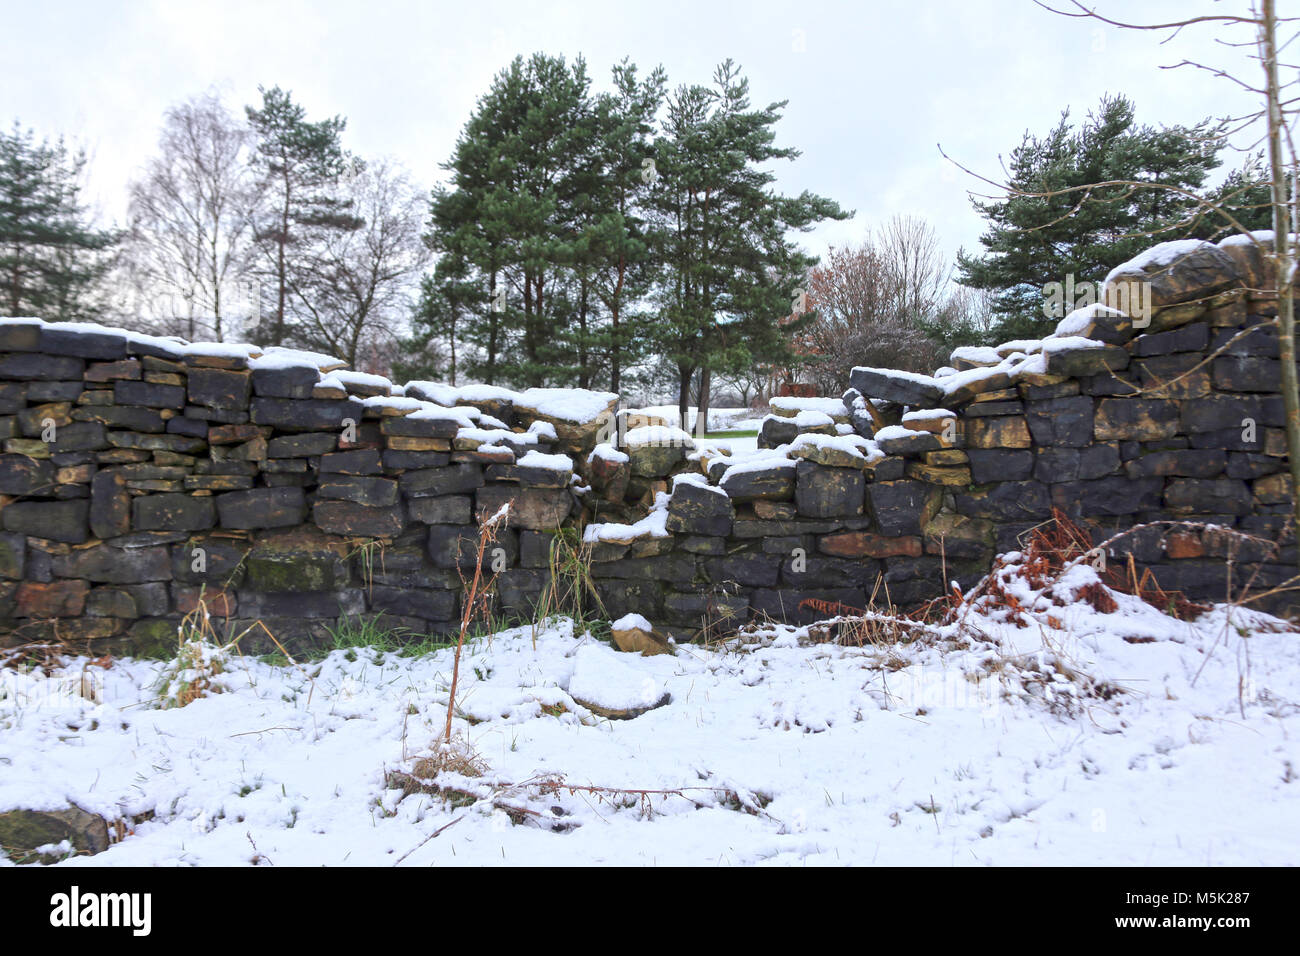 Collapsed dyke wall covered in snow in countryside Stock Photo